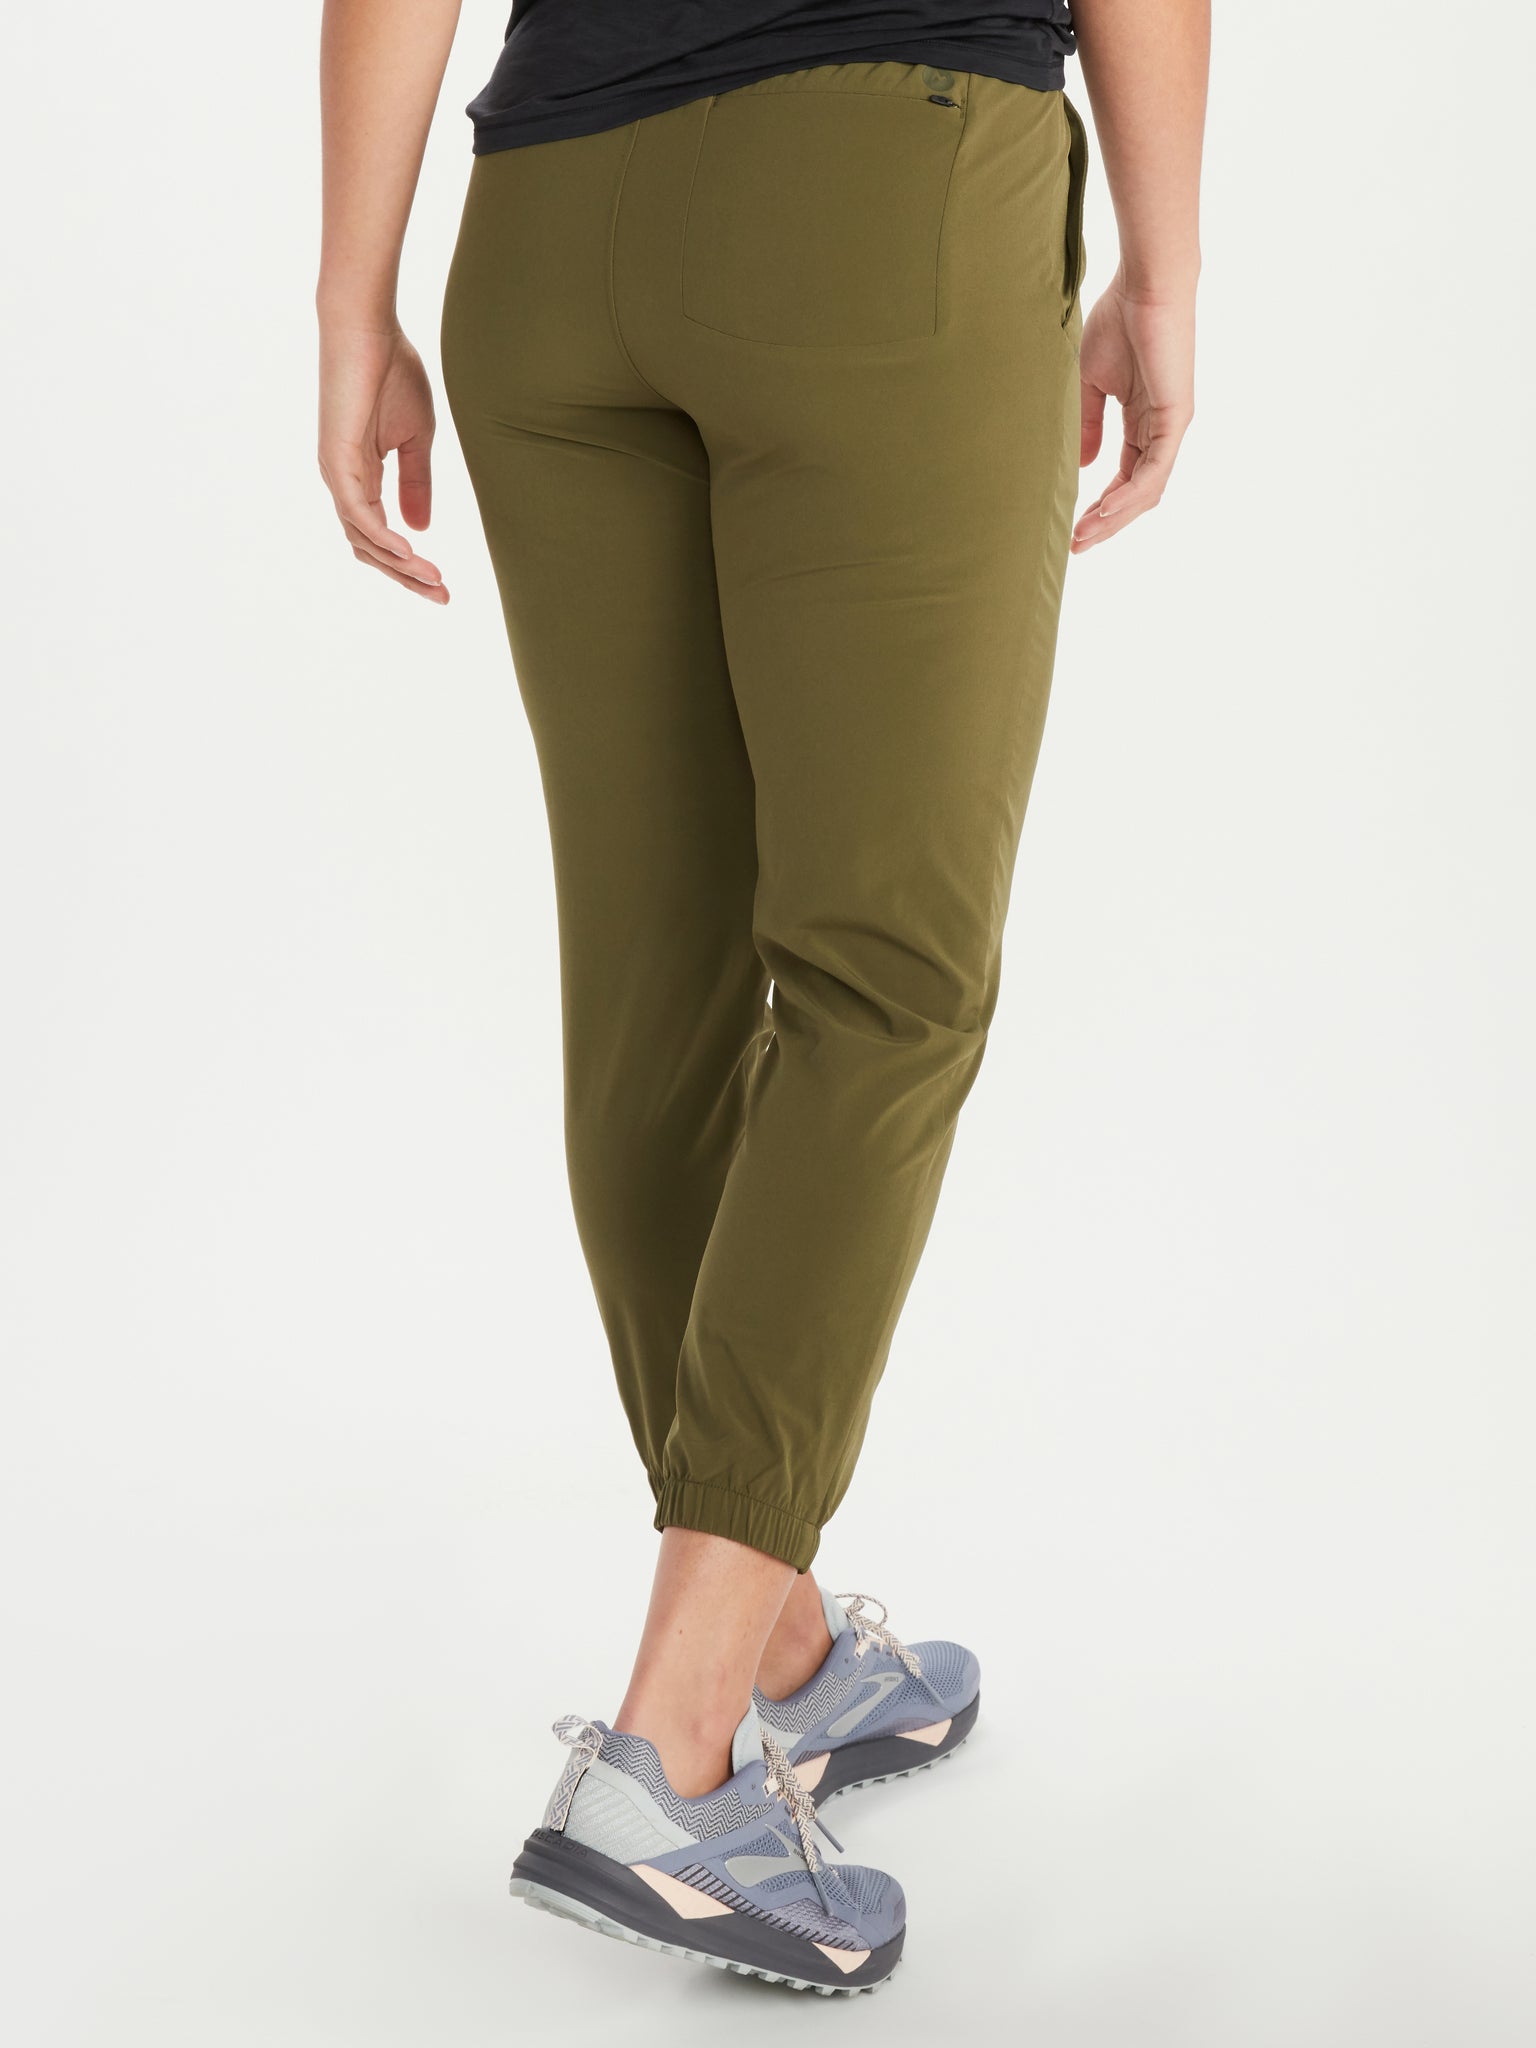 LULULEMON On The Fly Jogger Pants in Dark Olive Green Size 4